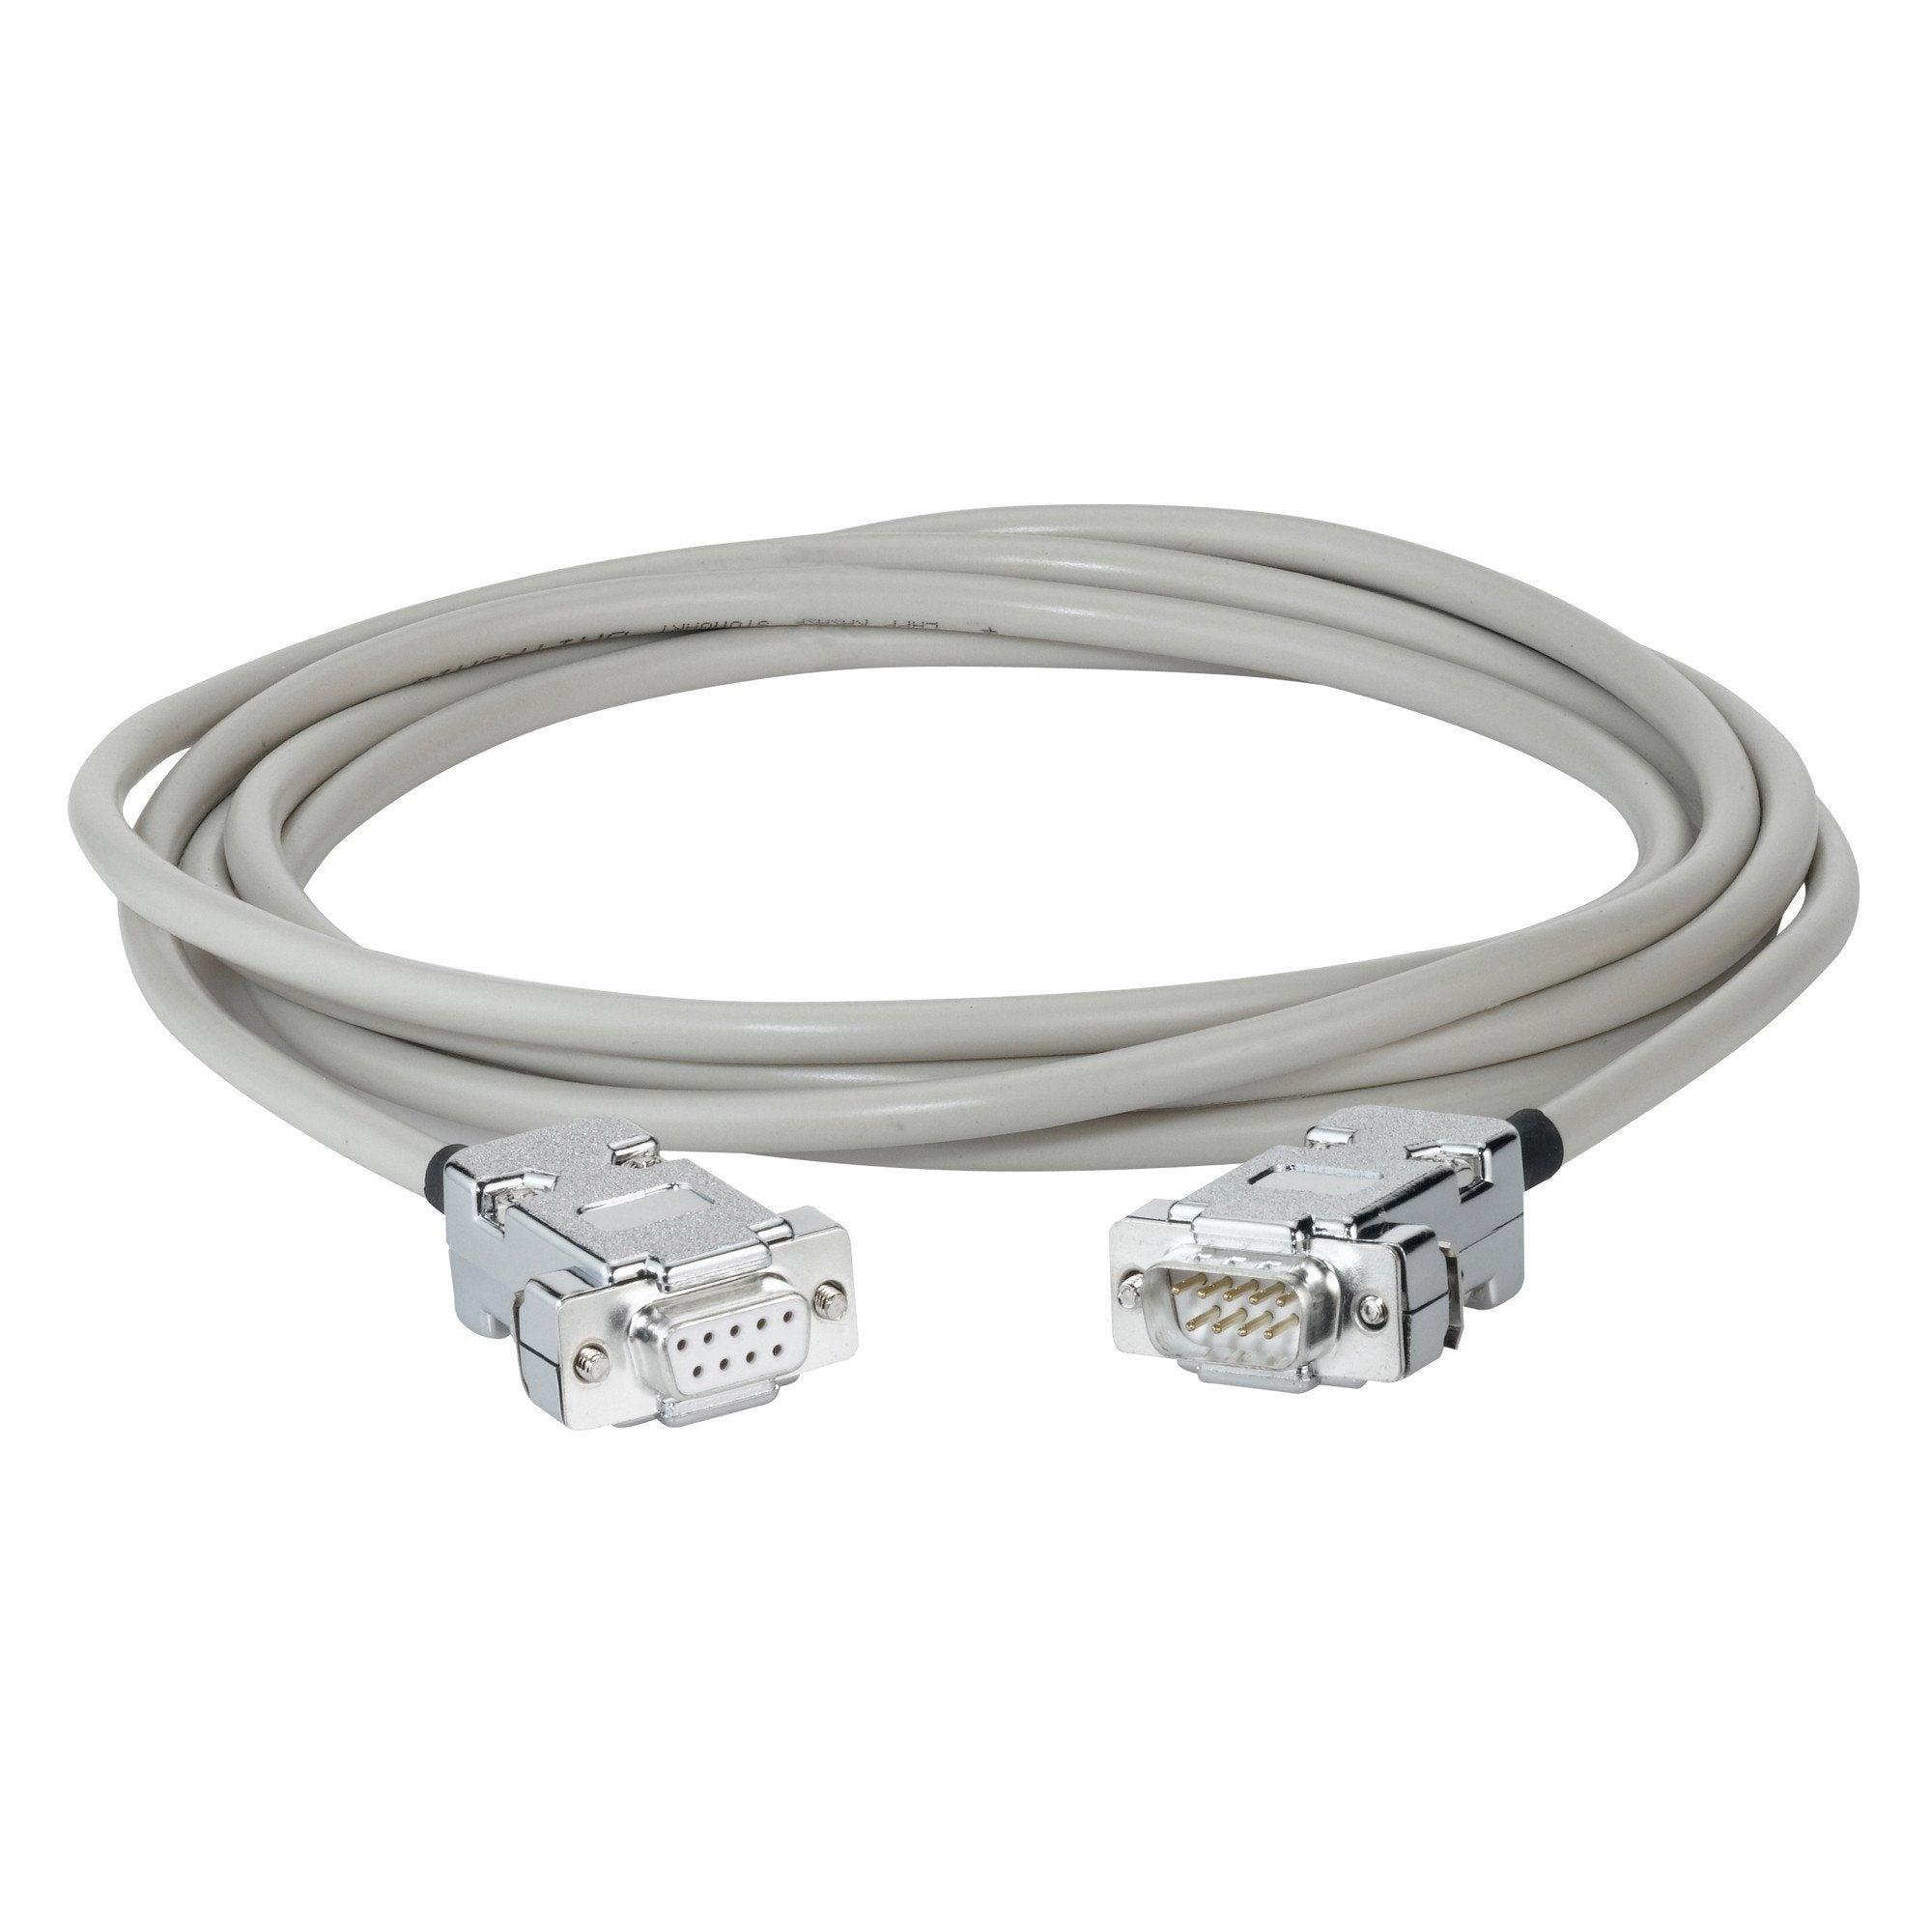 FusionChef RS232 Inerface Adapter Cable for FusionChef Diamond Model FusionChef Interface Cable FusionChef